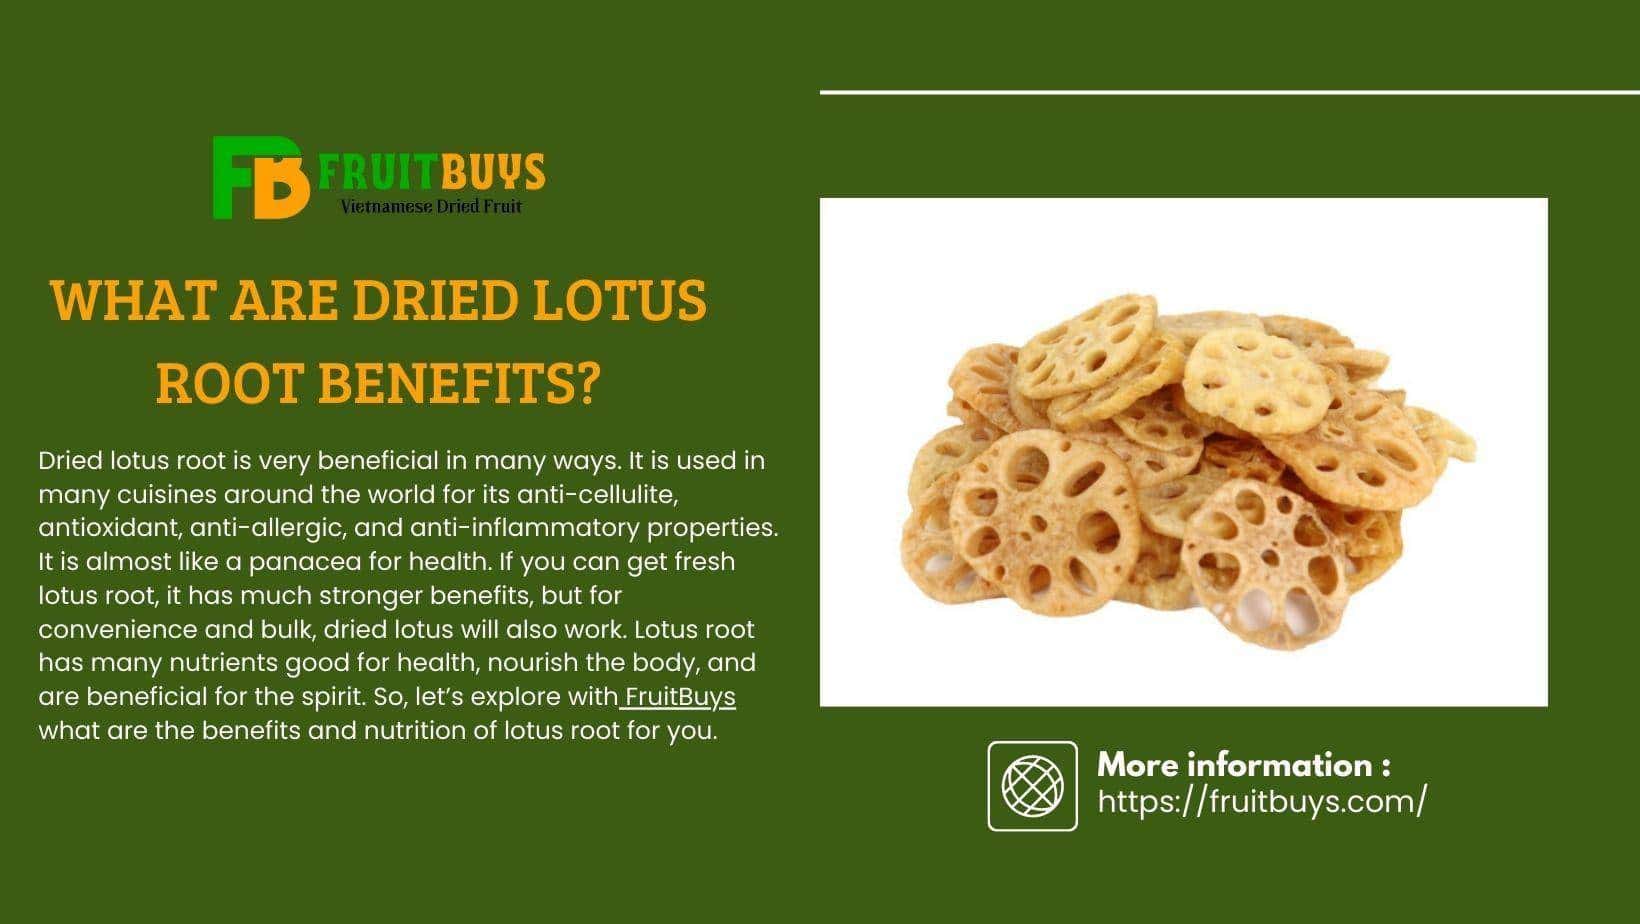 Fruitbuys Vietnam What Are Dried Lotus Root Benefits